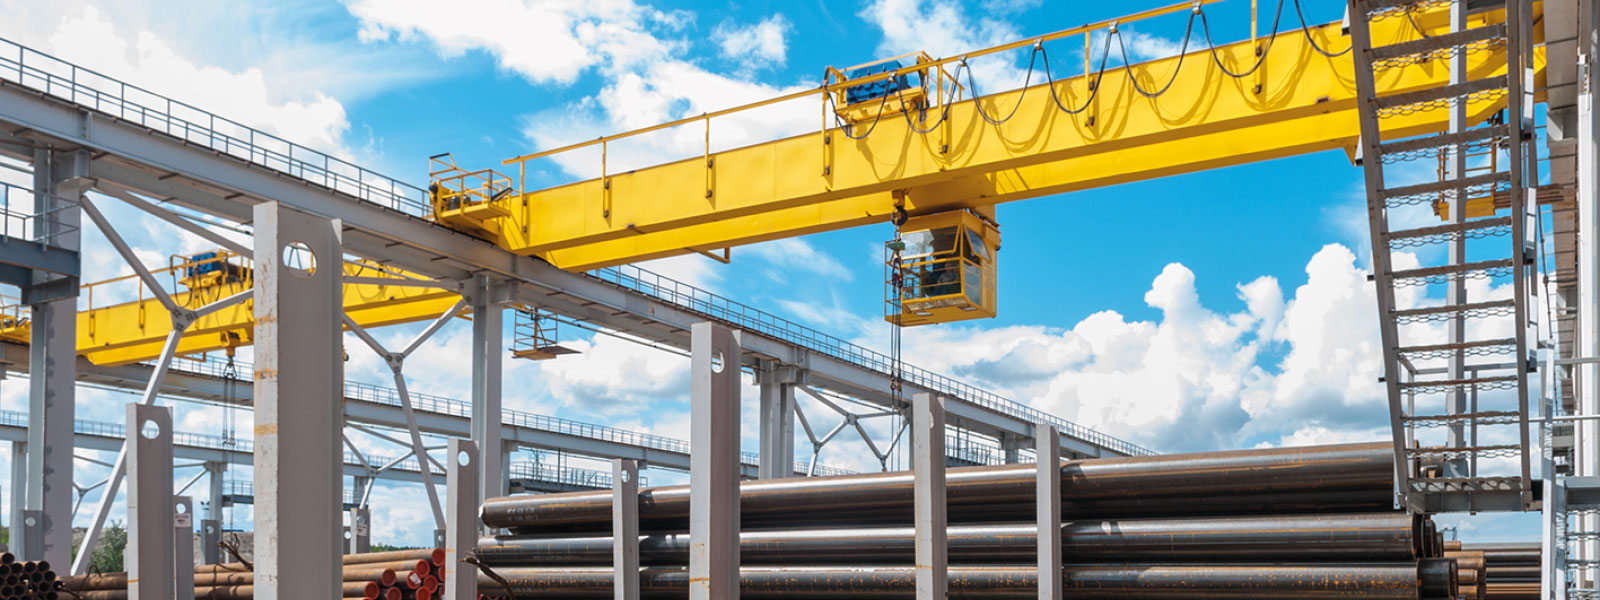 Crane Engineering : removable equipment for load gripping